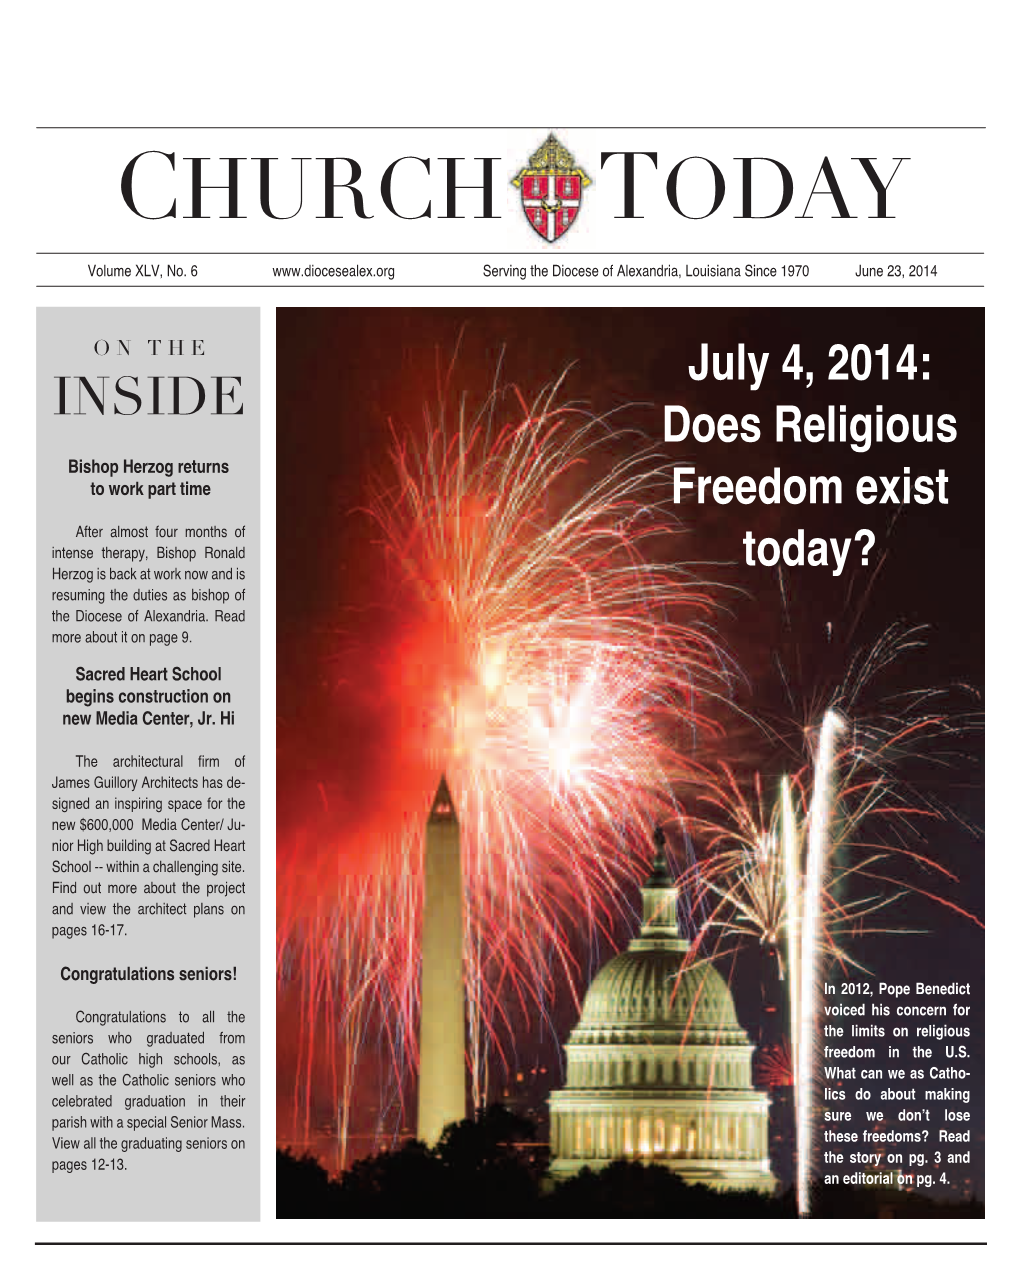 The Church Today, June 23, 2014